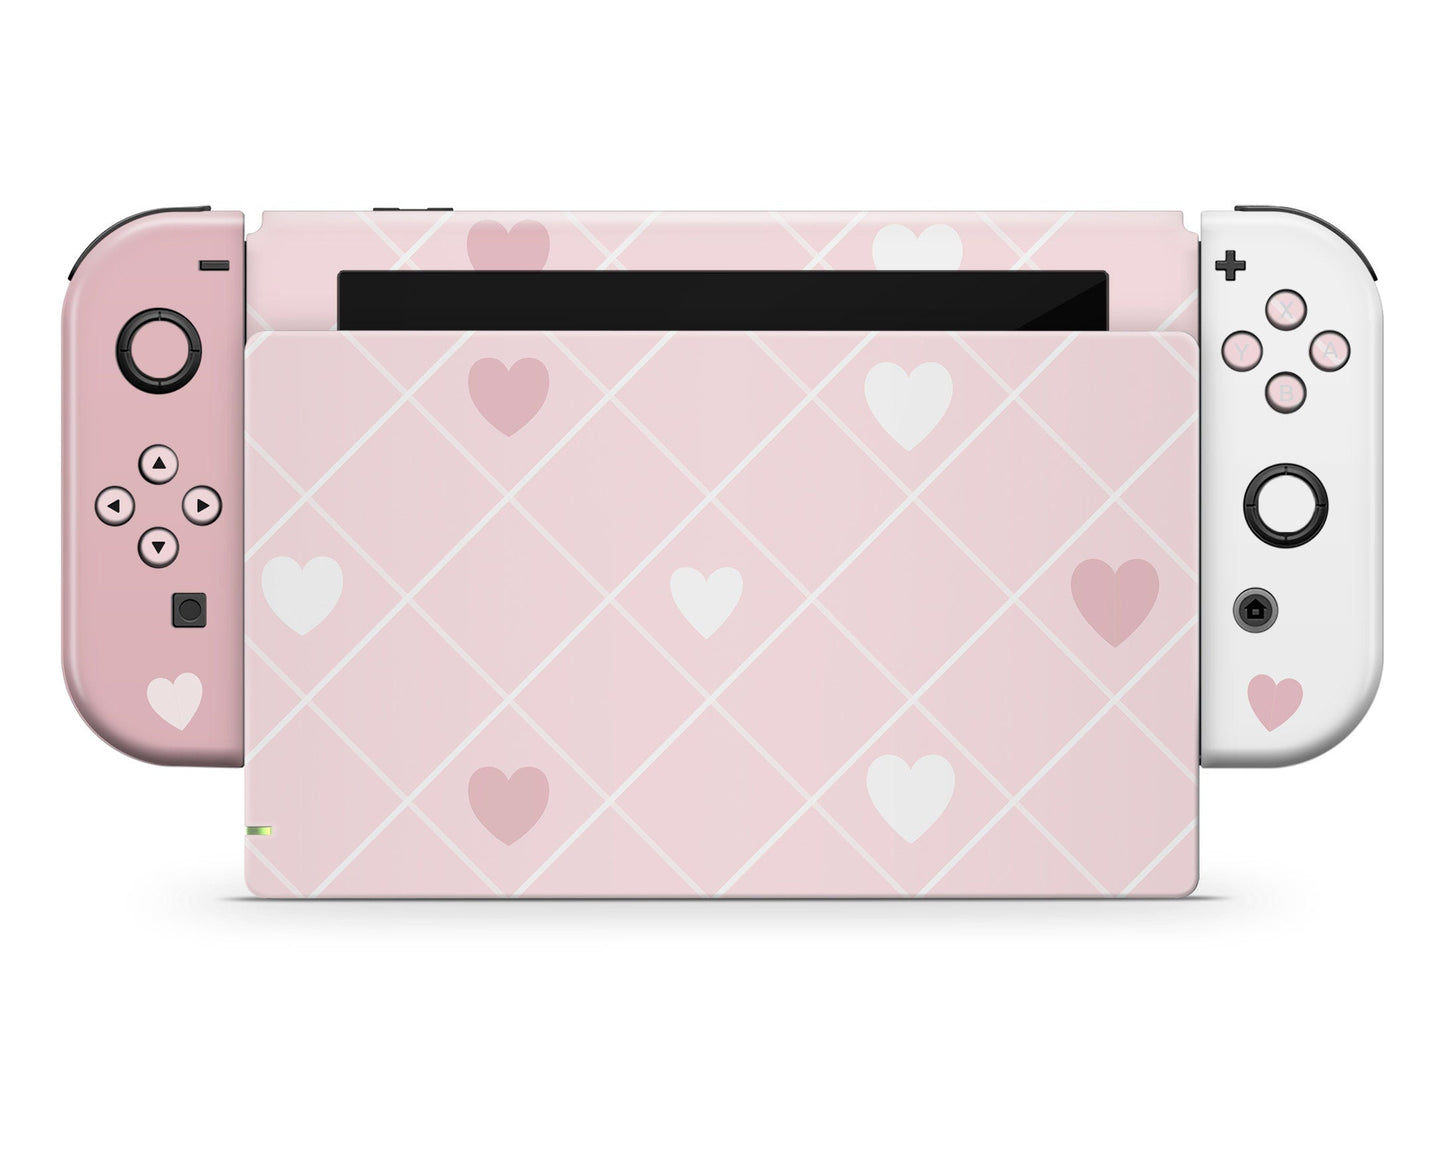 Lux Skins Nintendo Switch Love de Rosie Plaid Classic no logo Skins - Pattern Abstract Skin